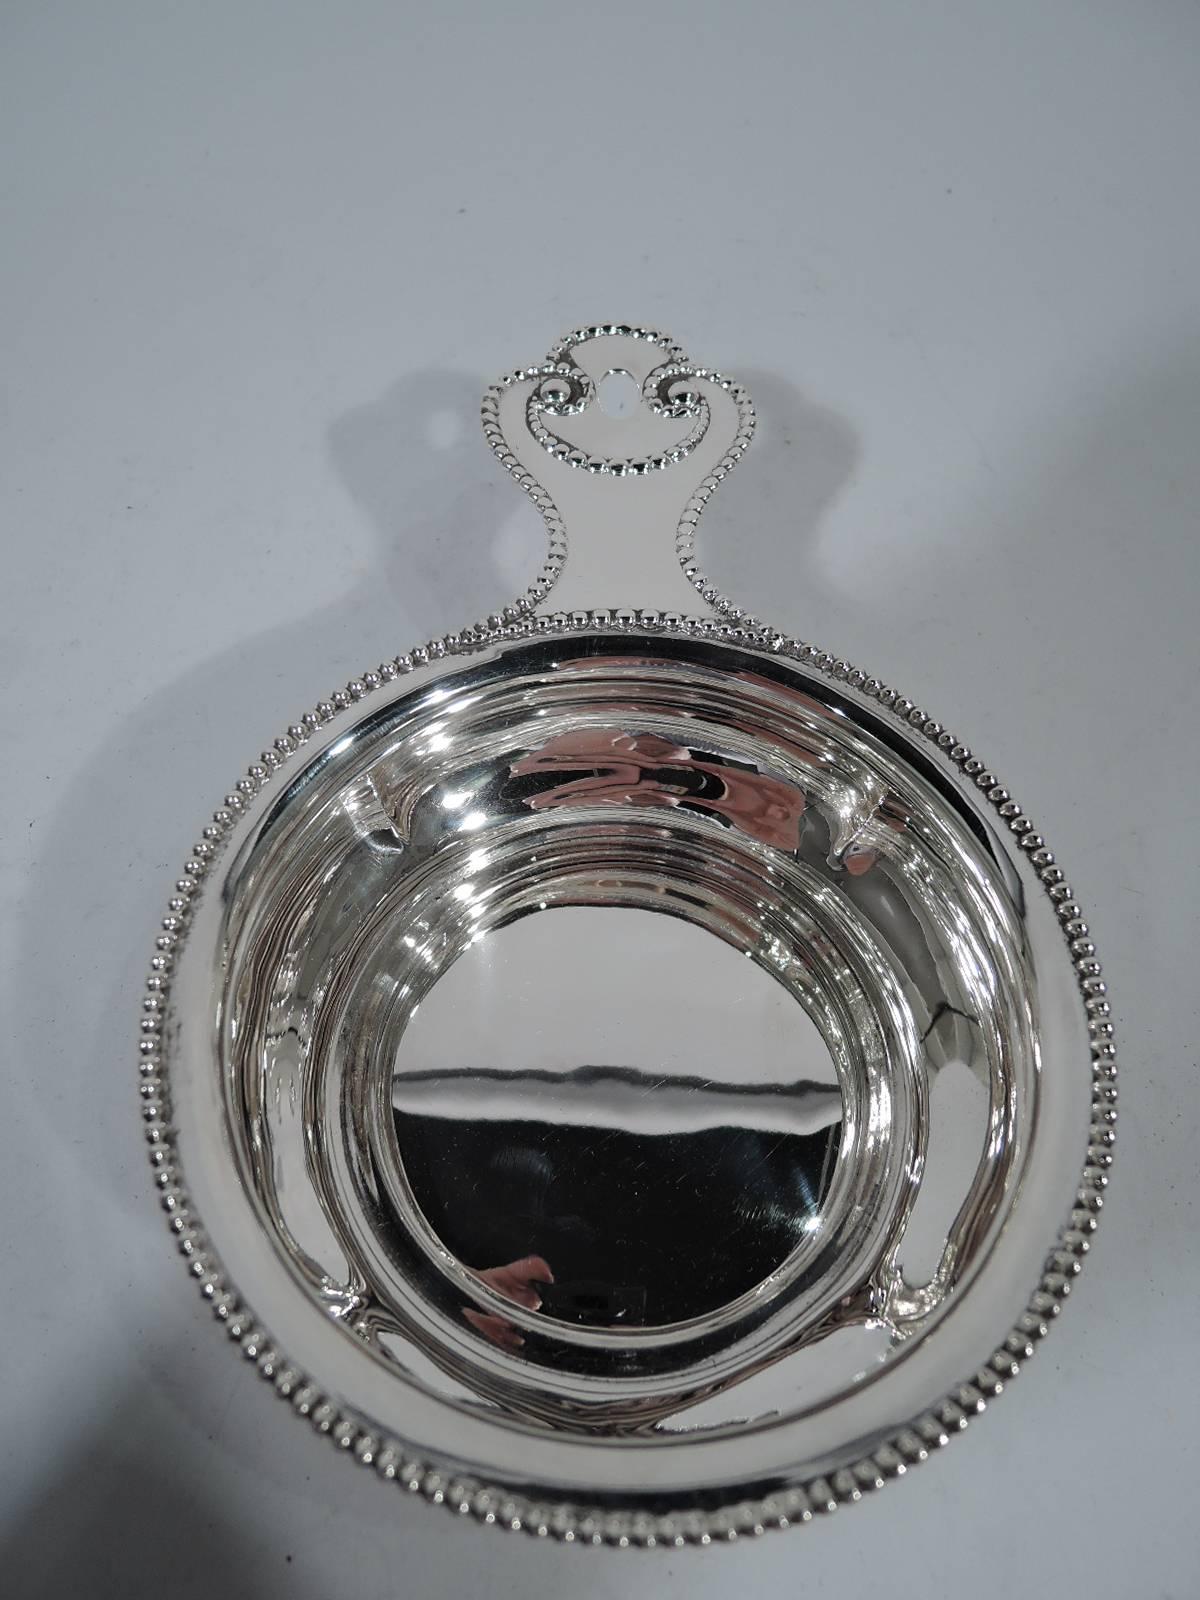 Sterling silver porringer. Made by Towle in Newburyport. Crimped bowl and solid handle with pierced oval. Beaded bowl and handle rims as well as beaded volute scrolls on handle. Jazzed-up tradition. Hallmark includes no. 105 and retailer’s name